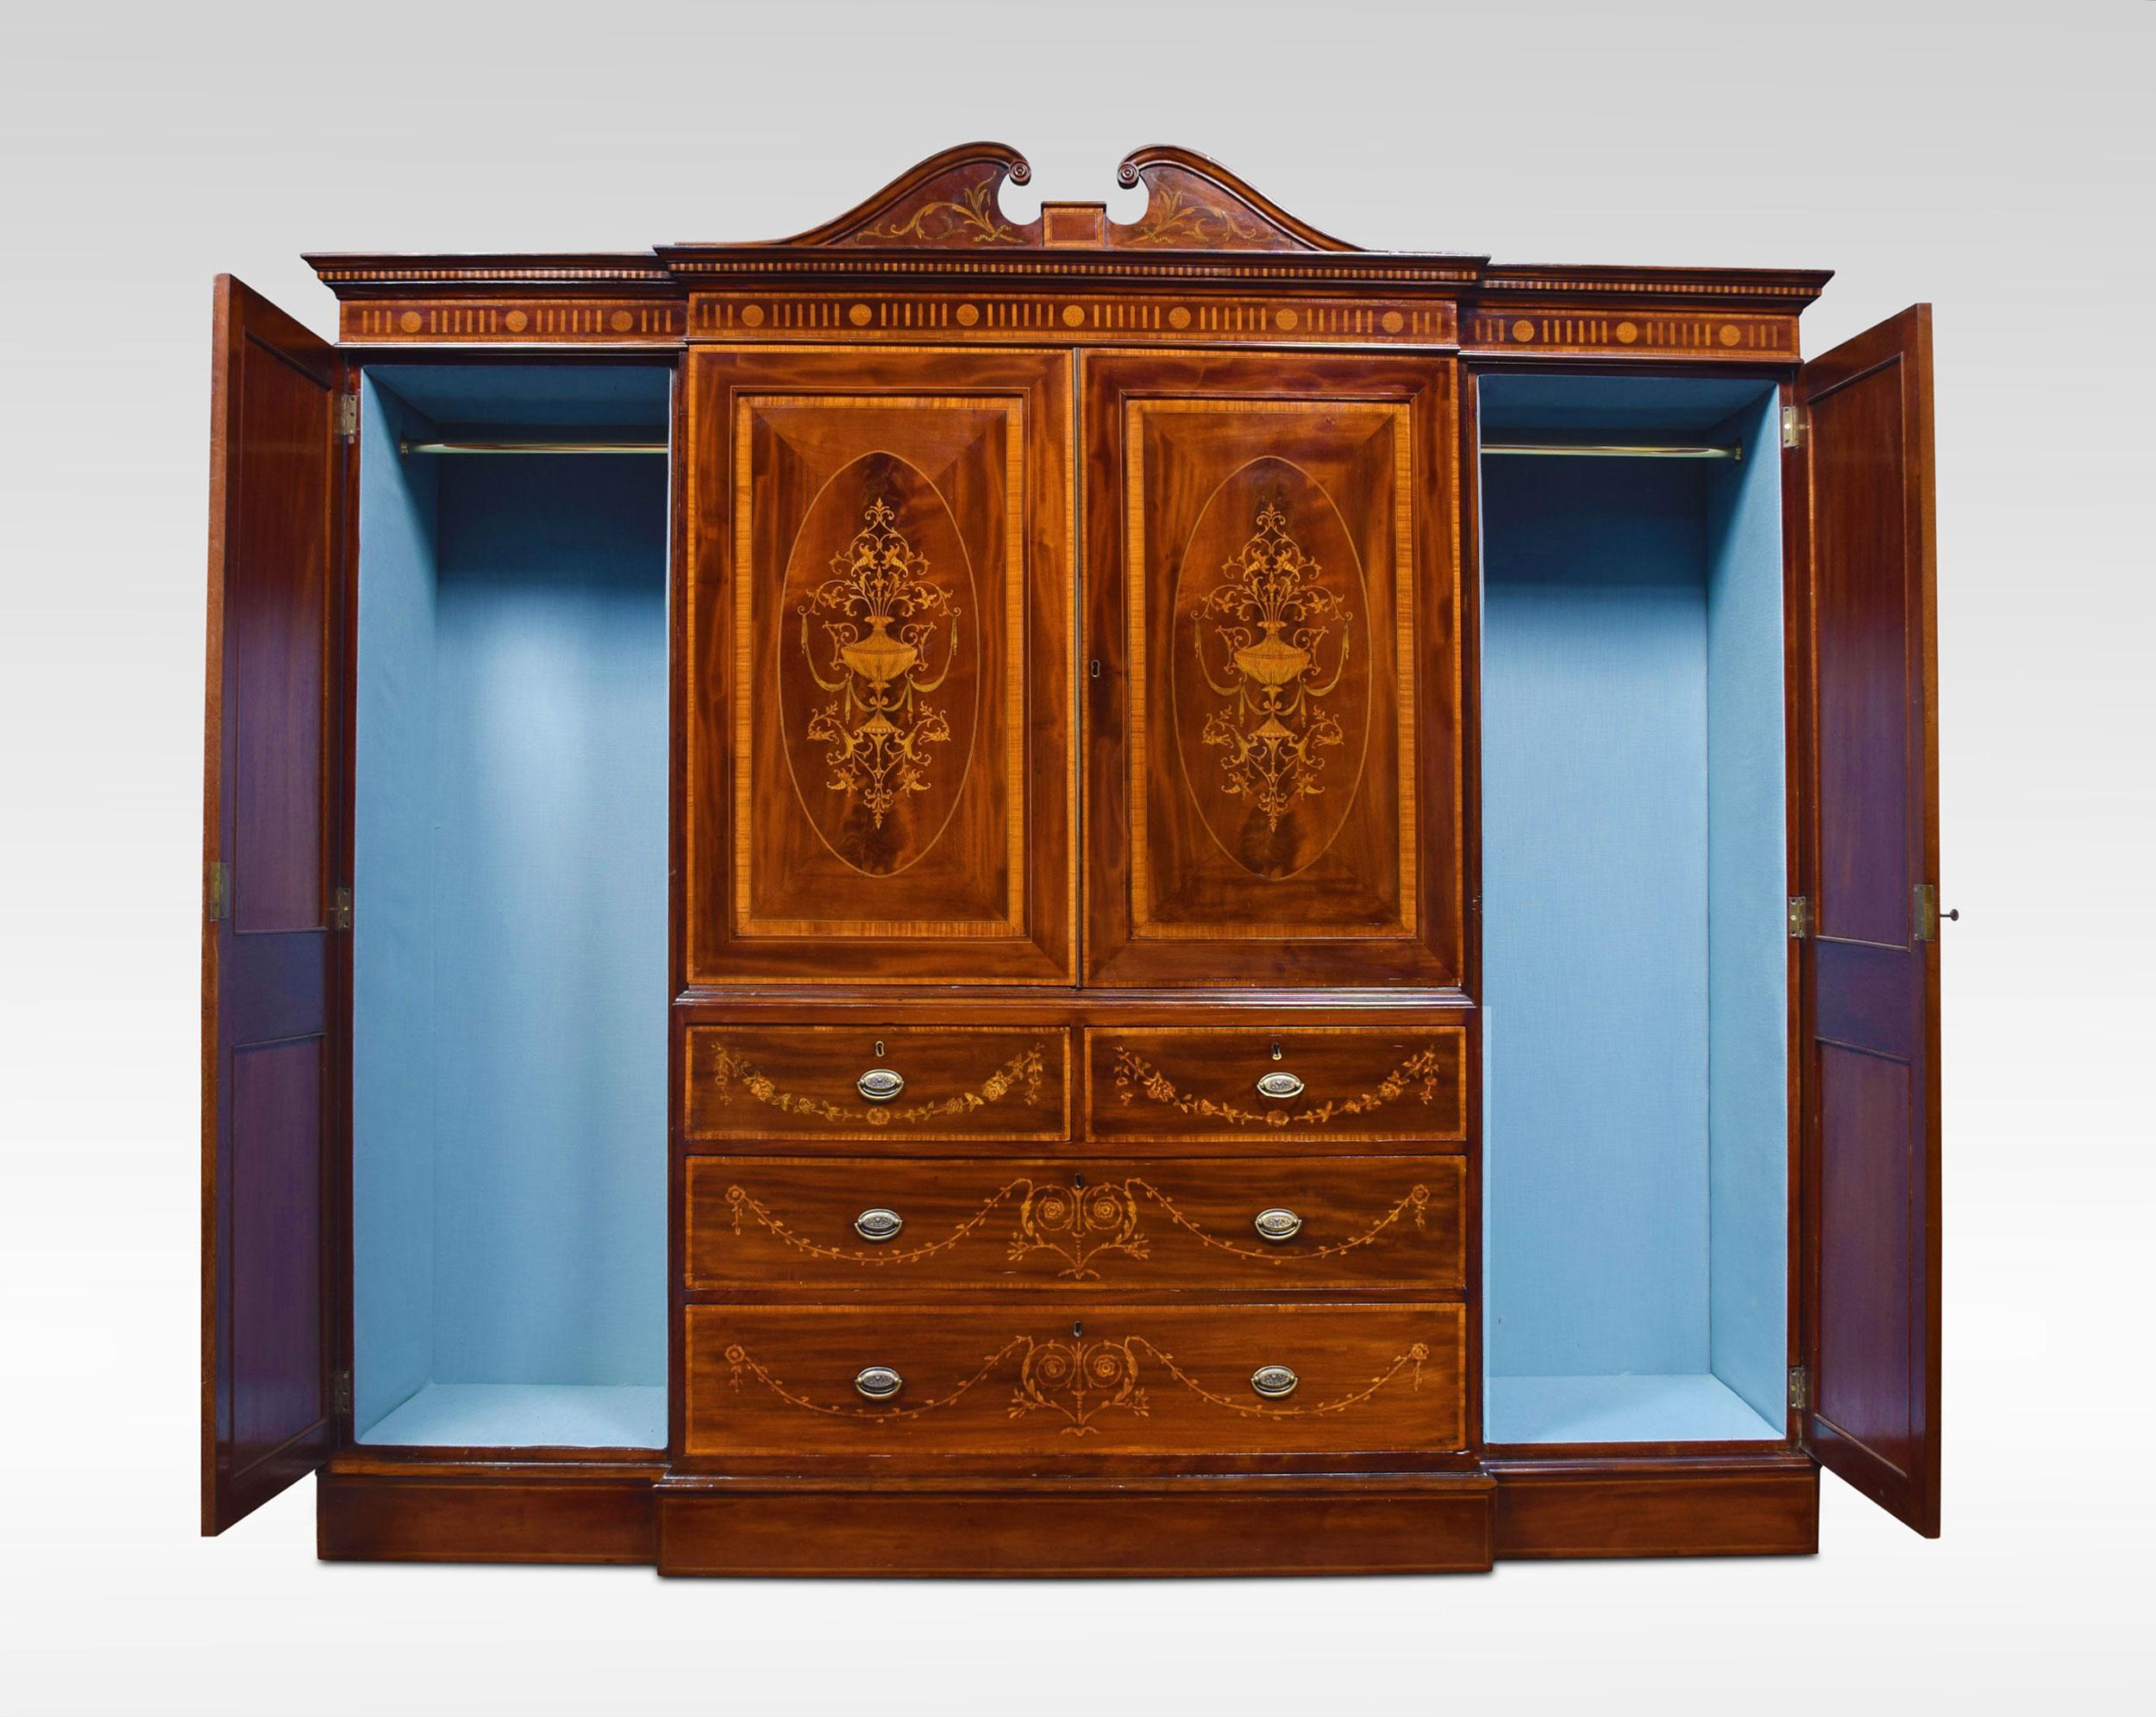 Sheraton revival mahogany satinwood crossbanded boxwood and ebony strung and inlaid breakfront wardrobe. The swan neck pediment above a moulded cornice inlaid with rosettes. The two centre doors opening to reveal the upholstered interior and hanging